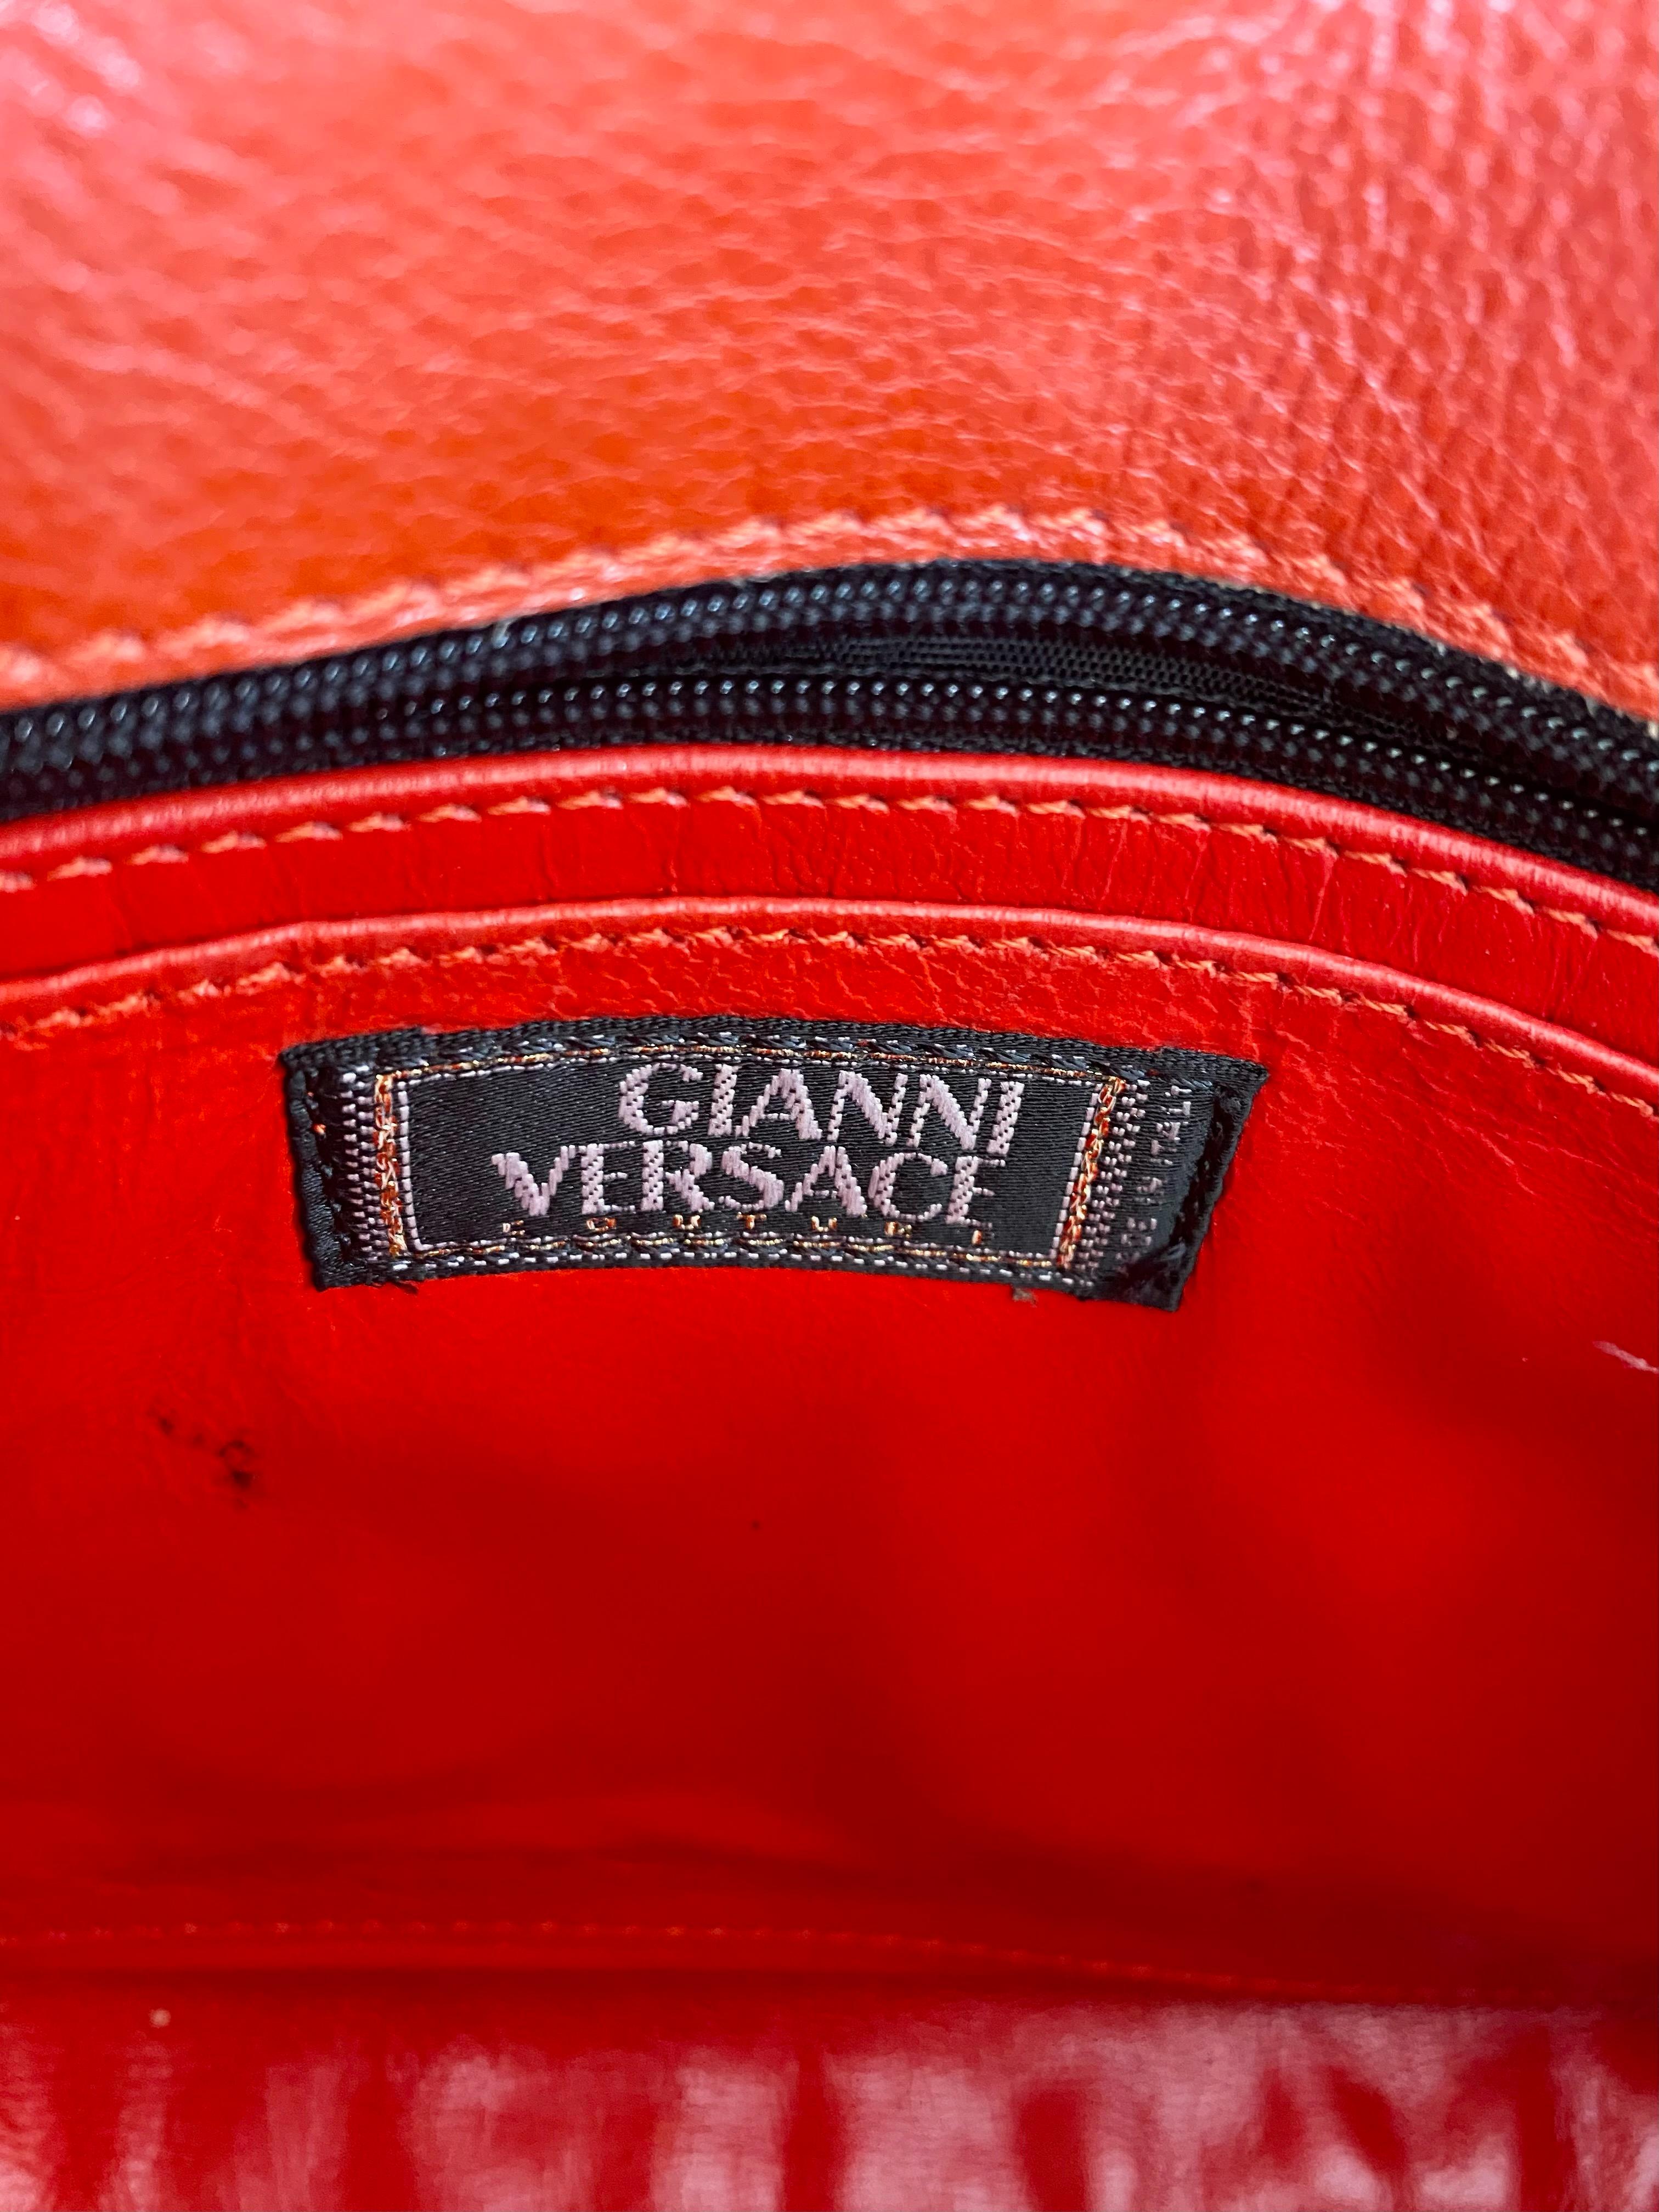 F/W 1996 Gianni Versace Cherry Red Croc Embossed Medusa Shoulder Bag  In Good Condition For Sale In West Hollywood, CA